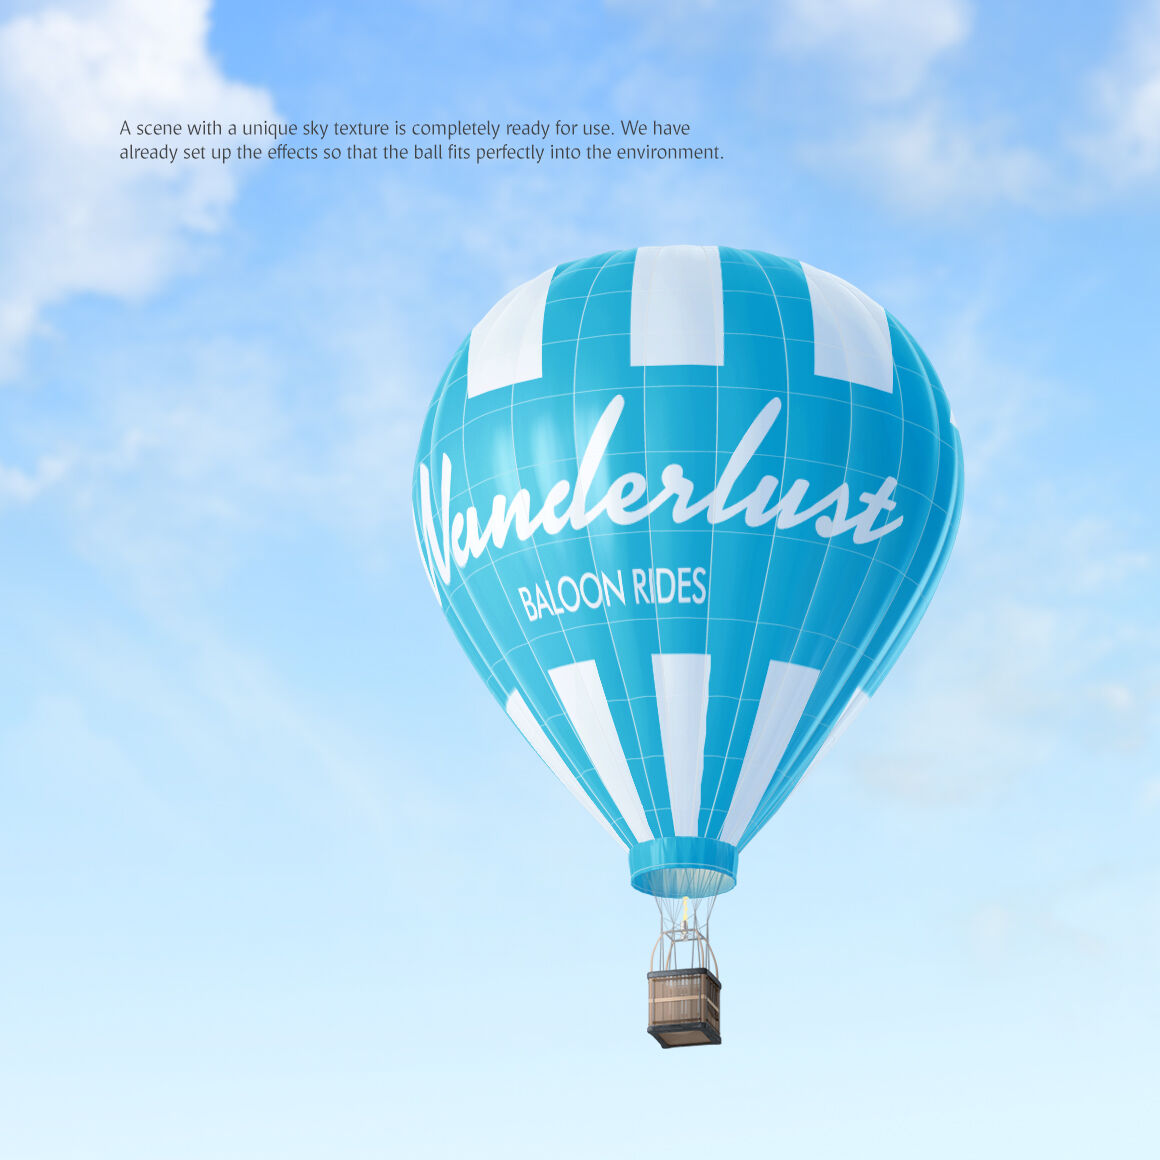 Download Free Balloon Mockup Psd Free Psd Mockup All Template Design Assets